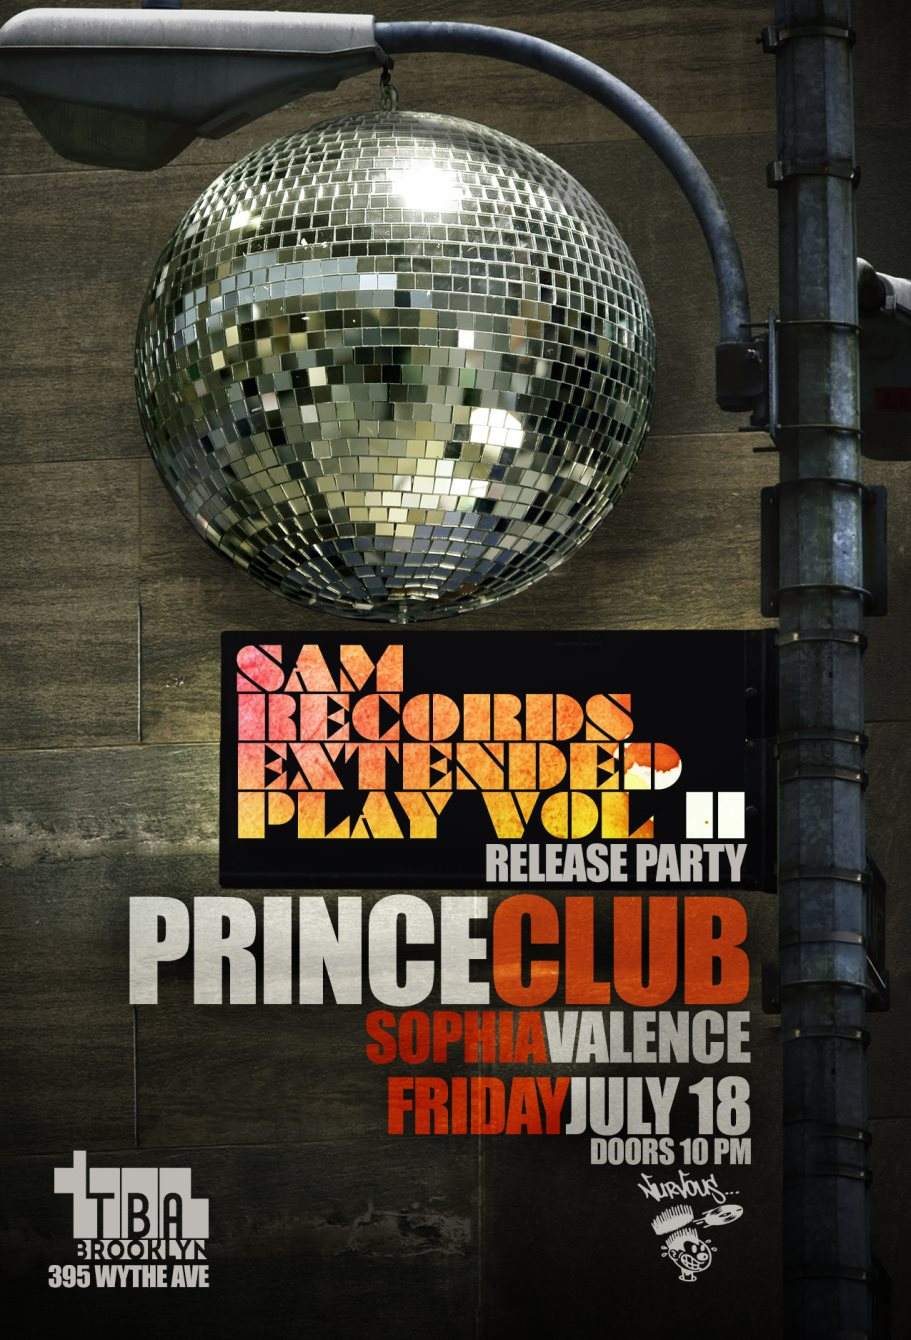 Sam Records Entended Play CD Release Party with Prince Club - Página frontal